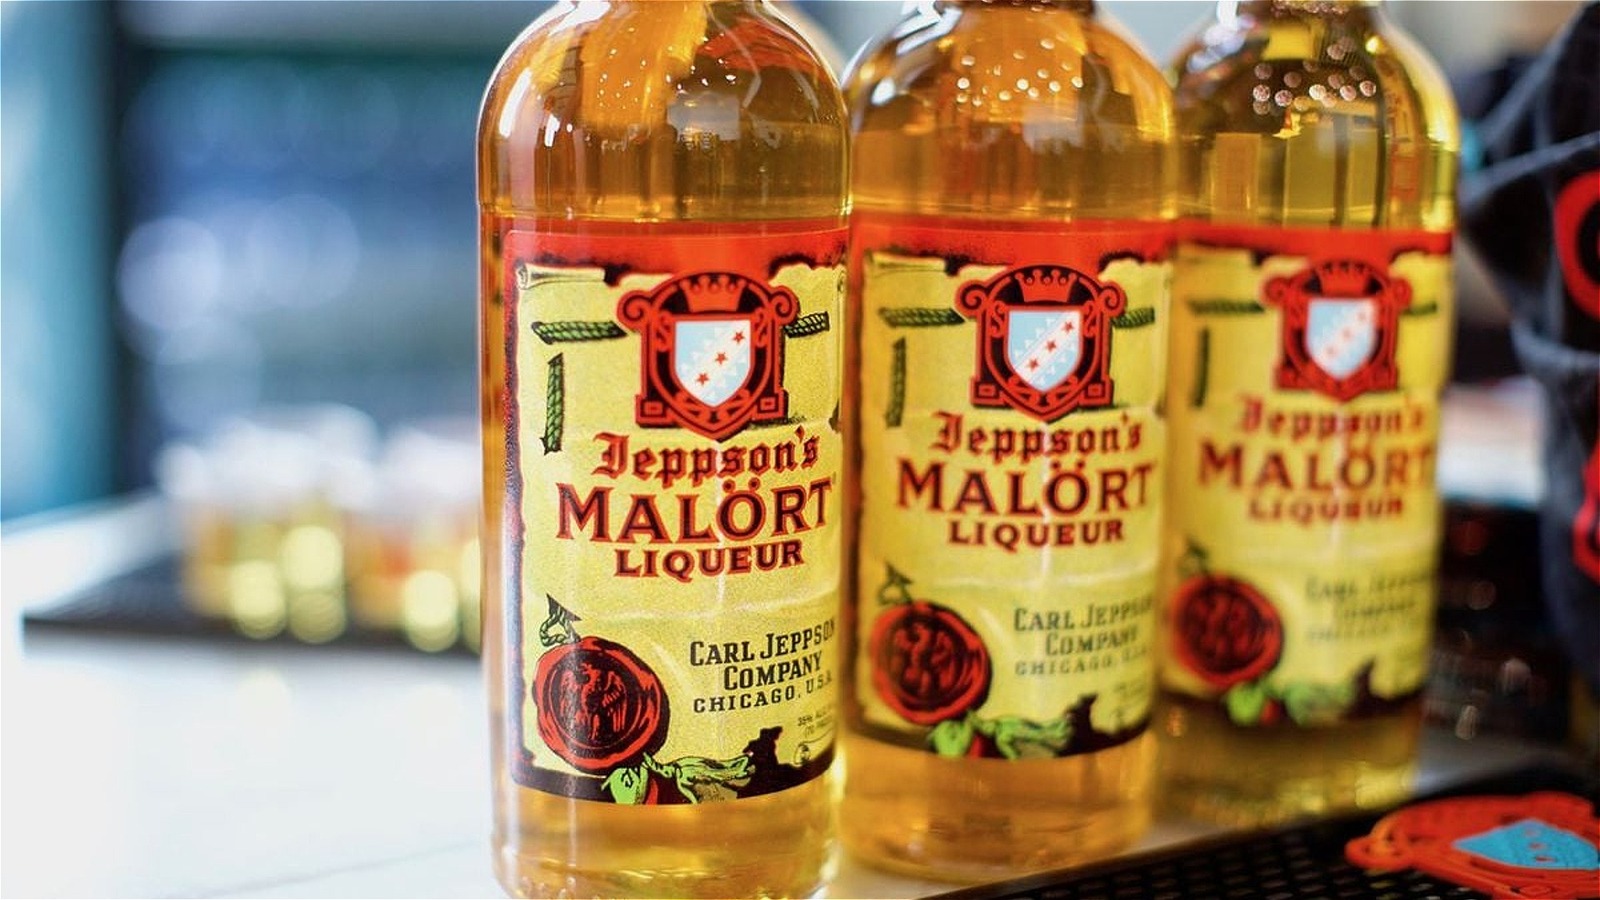 Can The Chicagoan Liquor Jeppson's Malört Be Mixed Into Cocktails?